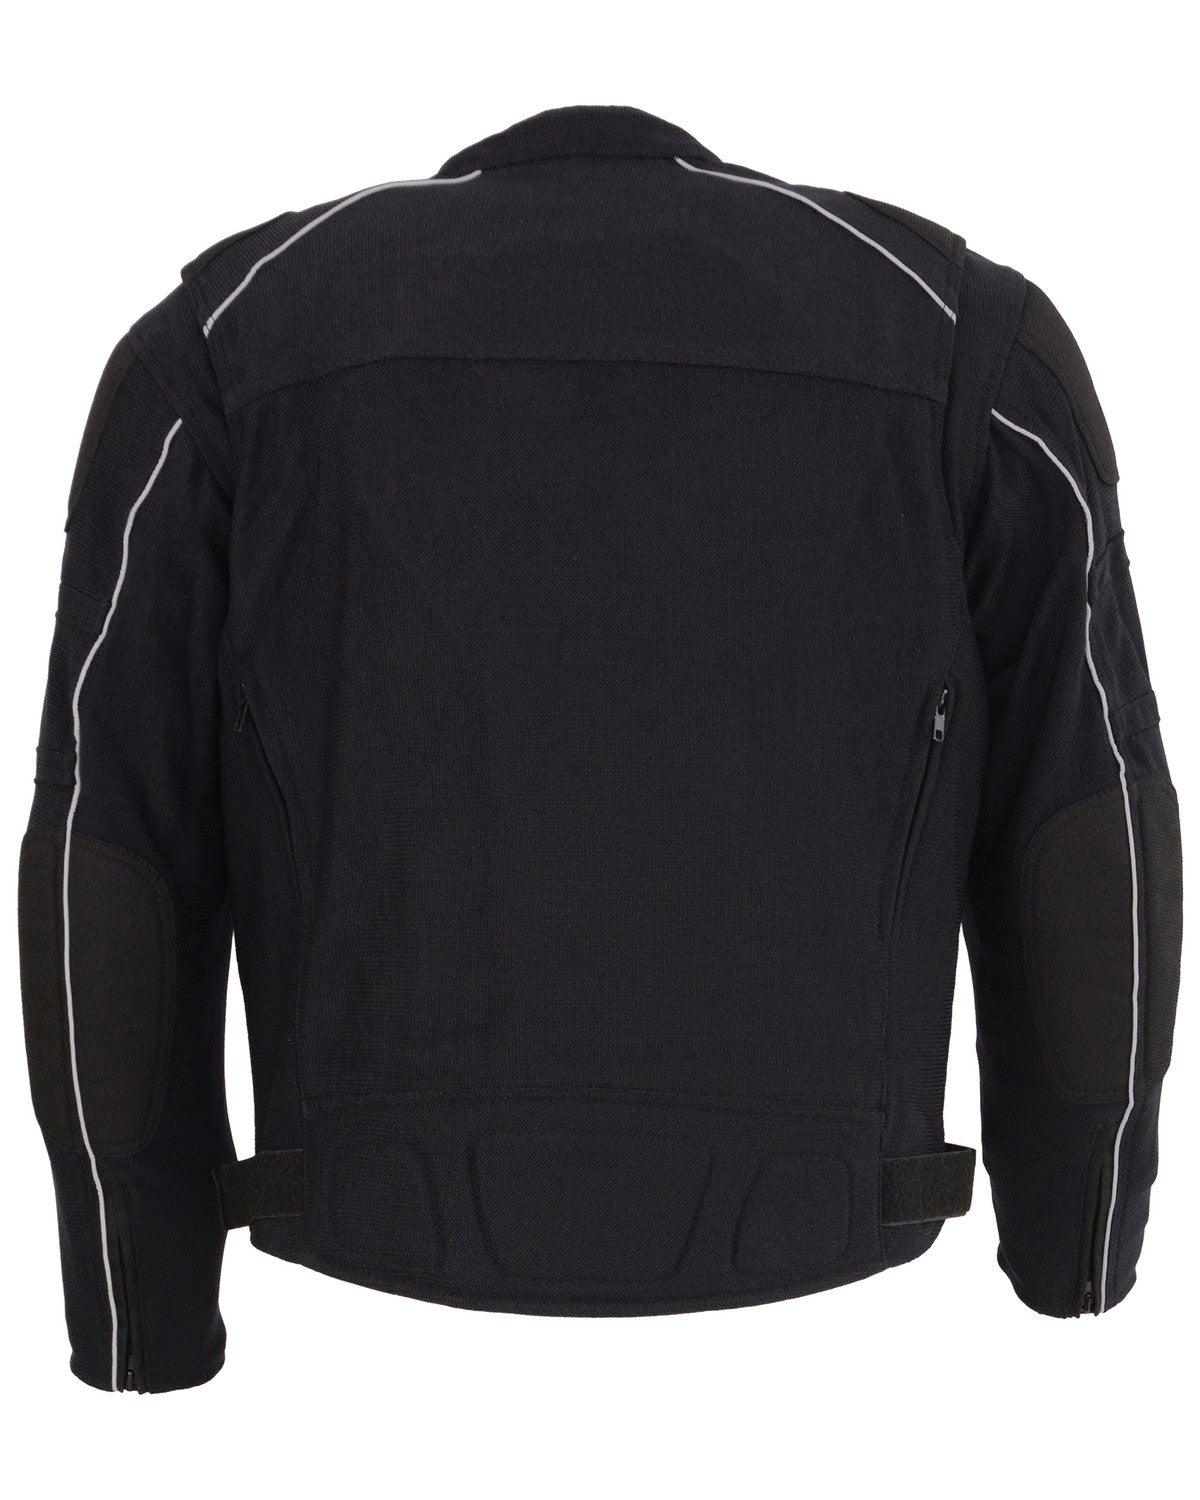 Mesh Racing Jacket with Removable Rain Jacket For Men